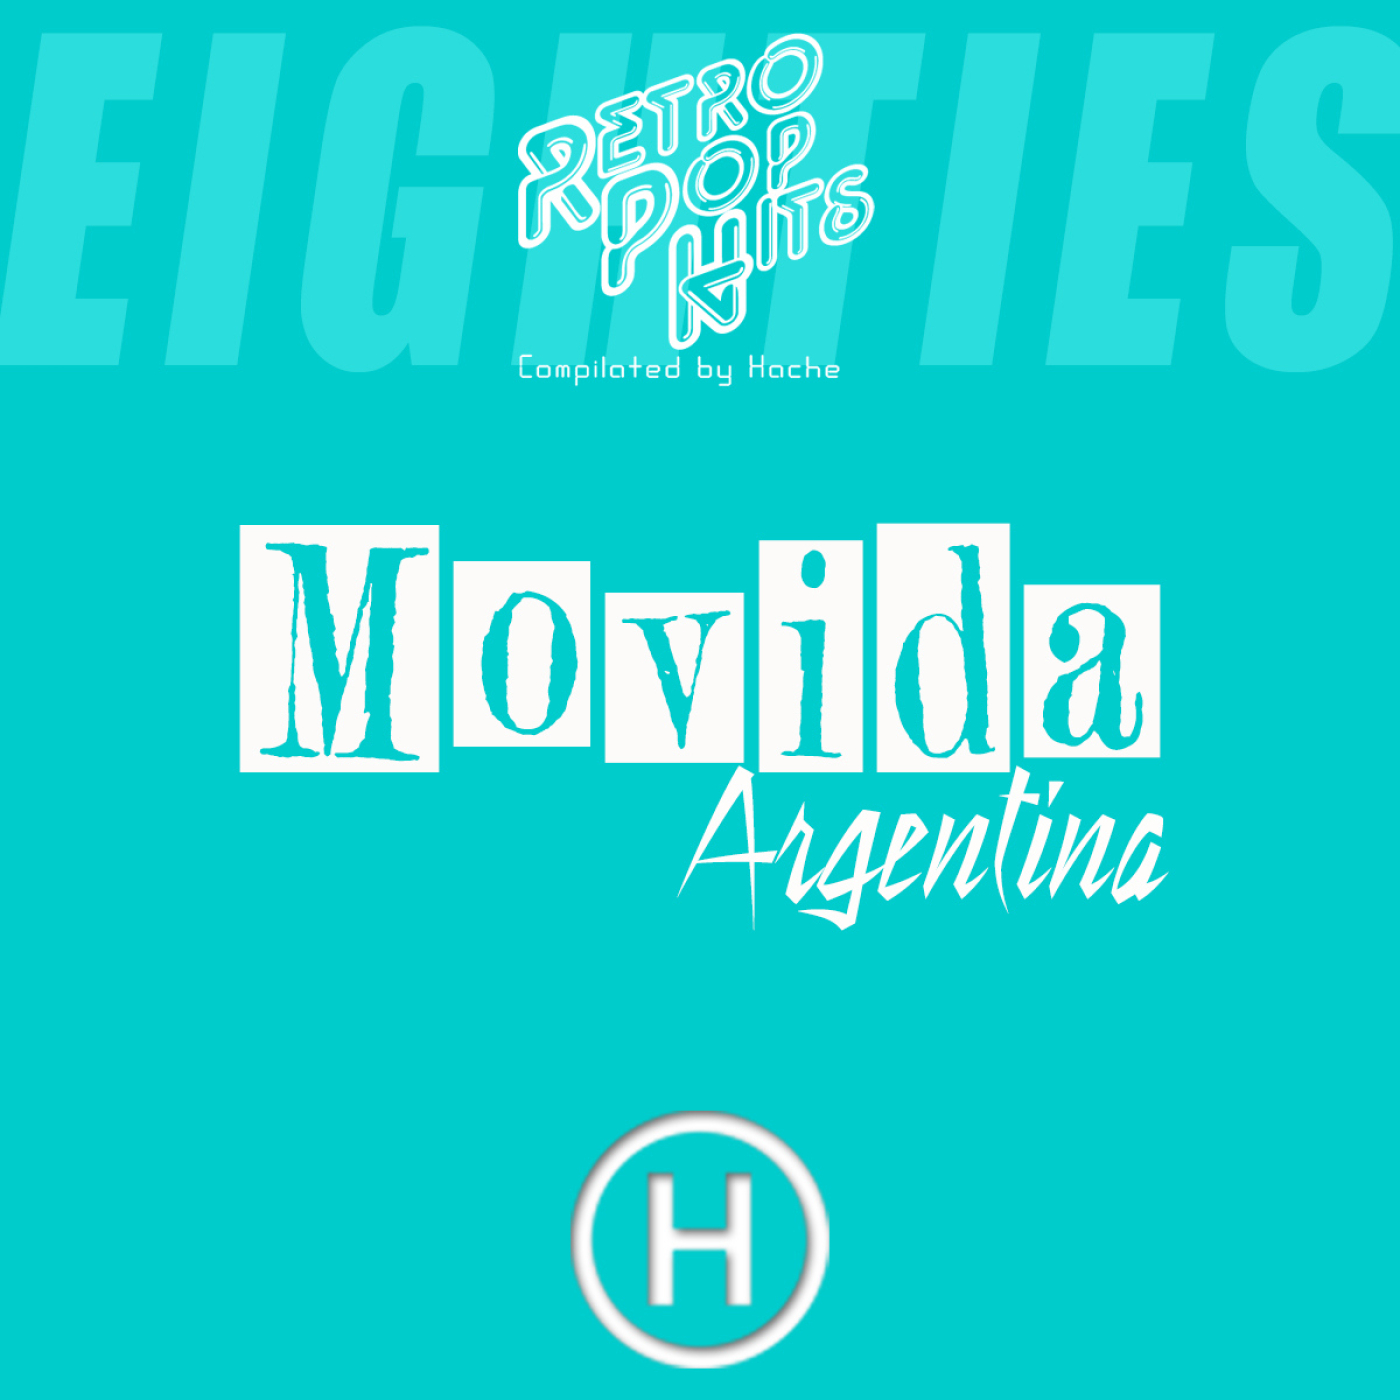 80s Movida Argentina (Compilated by Hache)